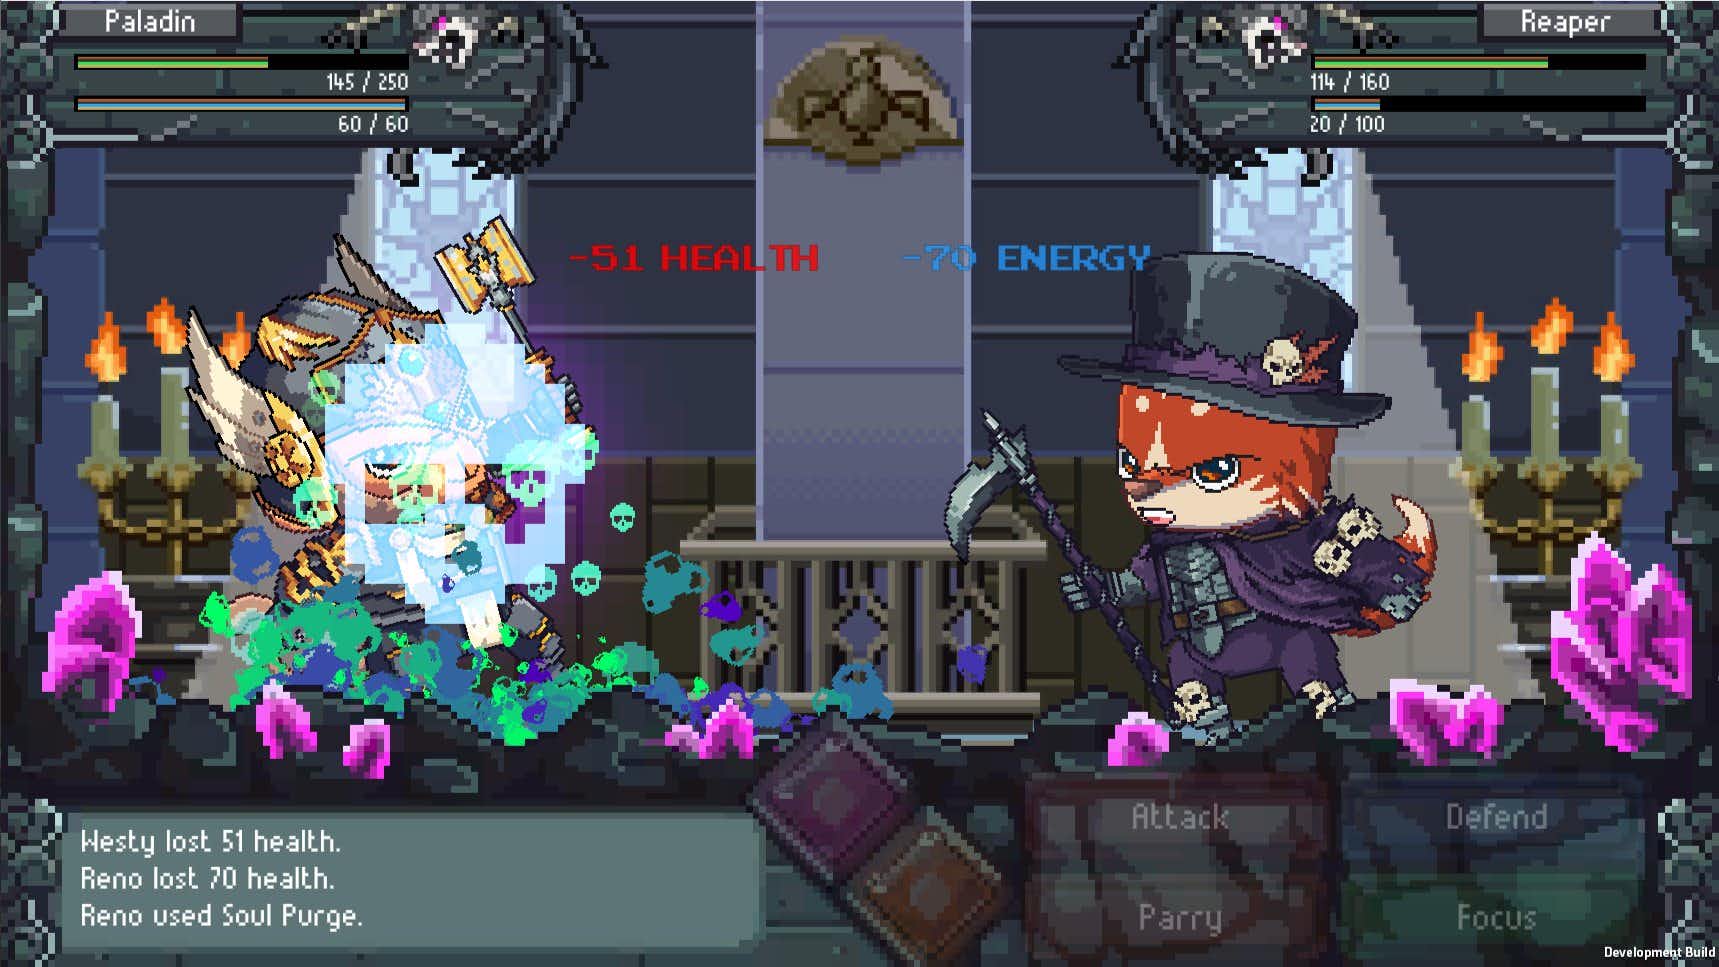 game image from PxQuest